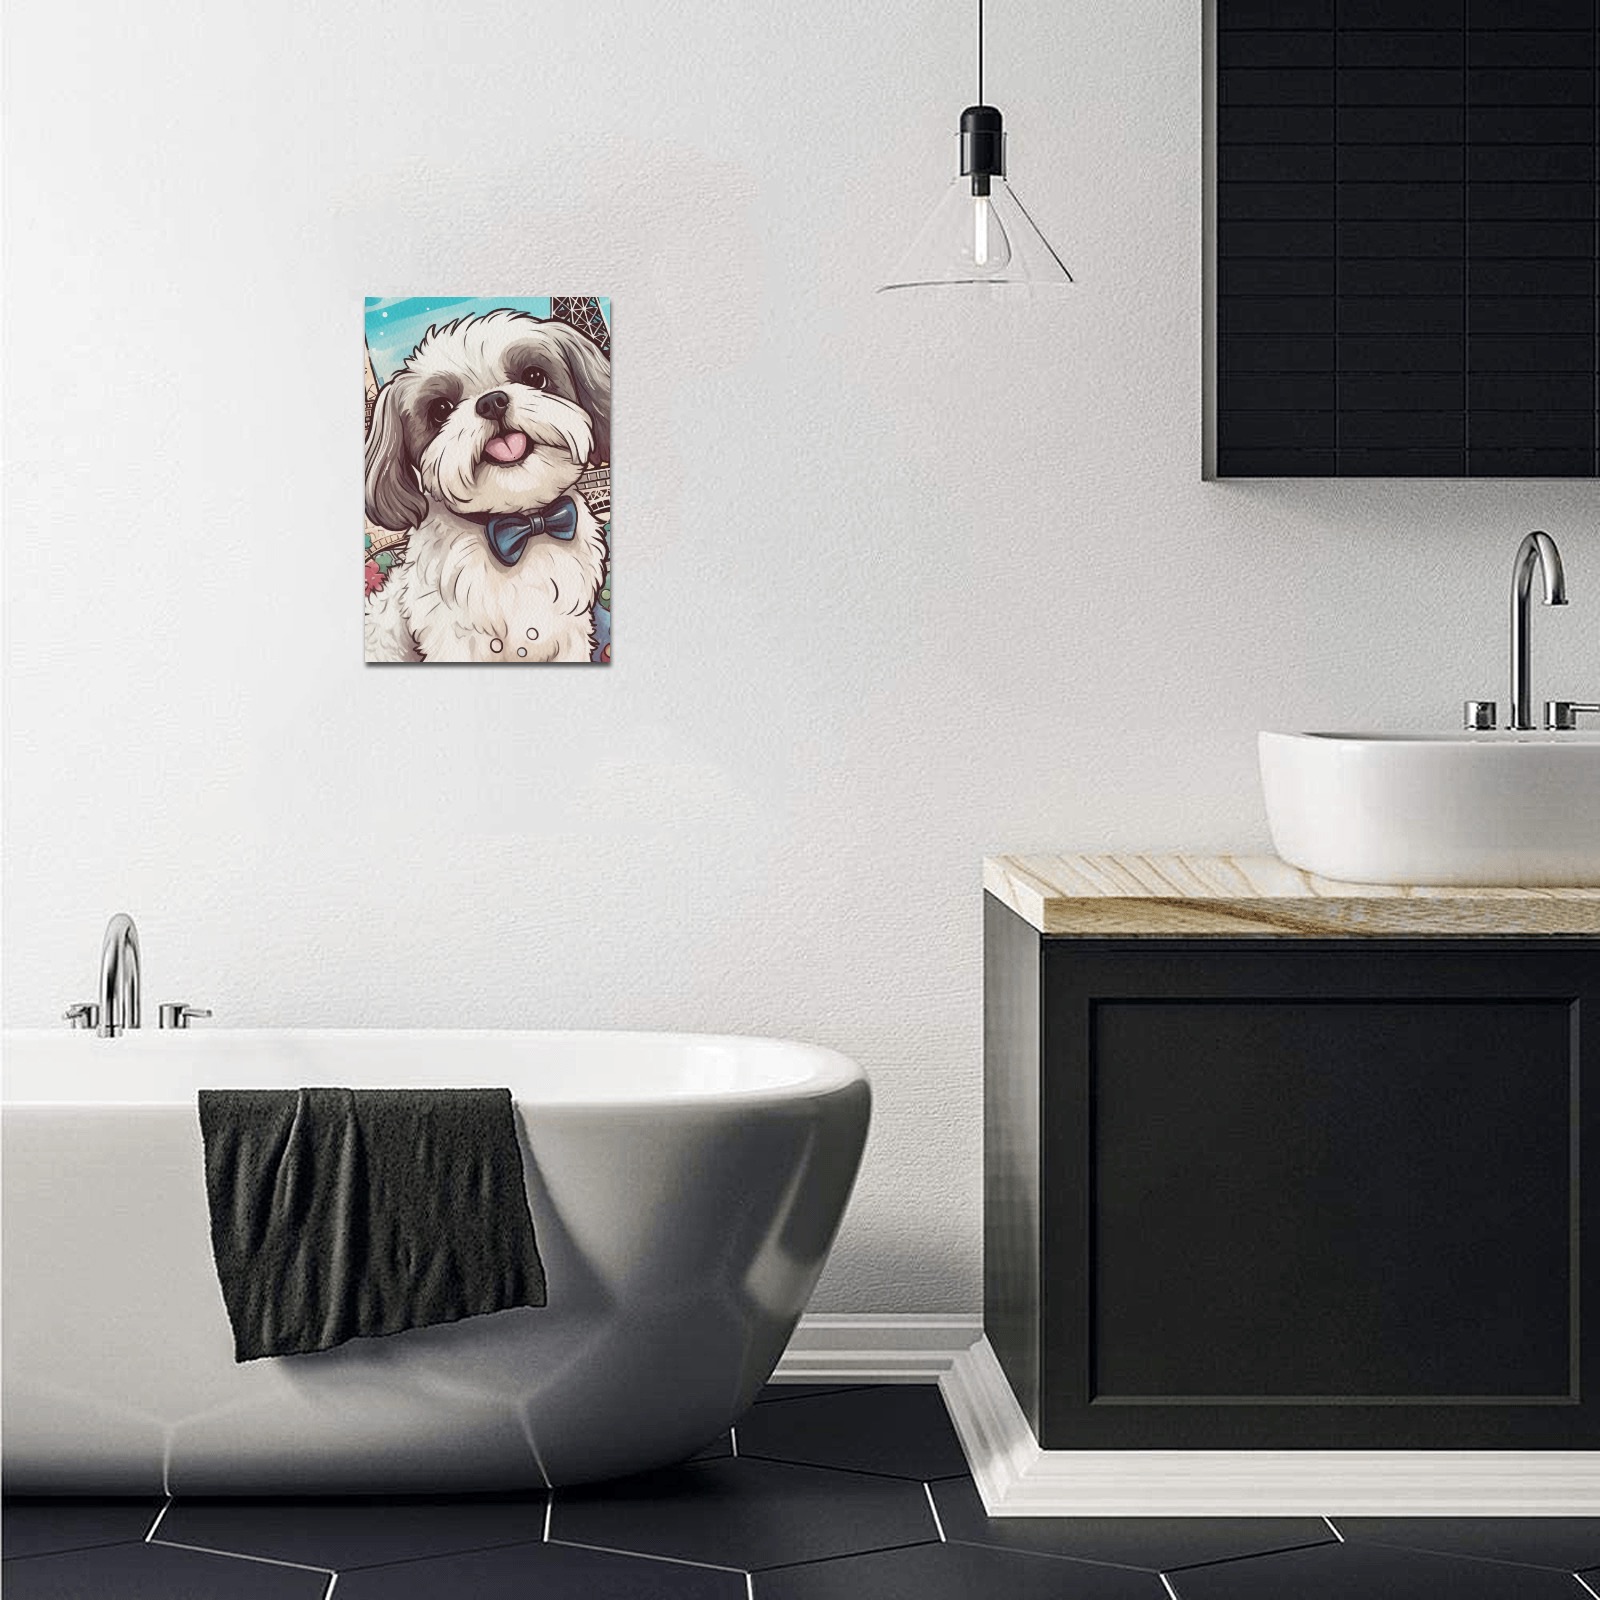 wincha_A_black_and_white_shih_tzu_dog_with_a_white_cowlick_and__66ab5915-4fd0-474c-bdb4-65ff65cdeb04 Upgraded Canvas Print 8"x12"